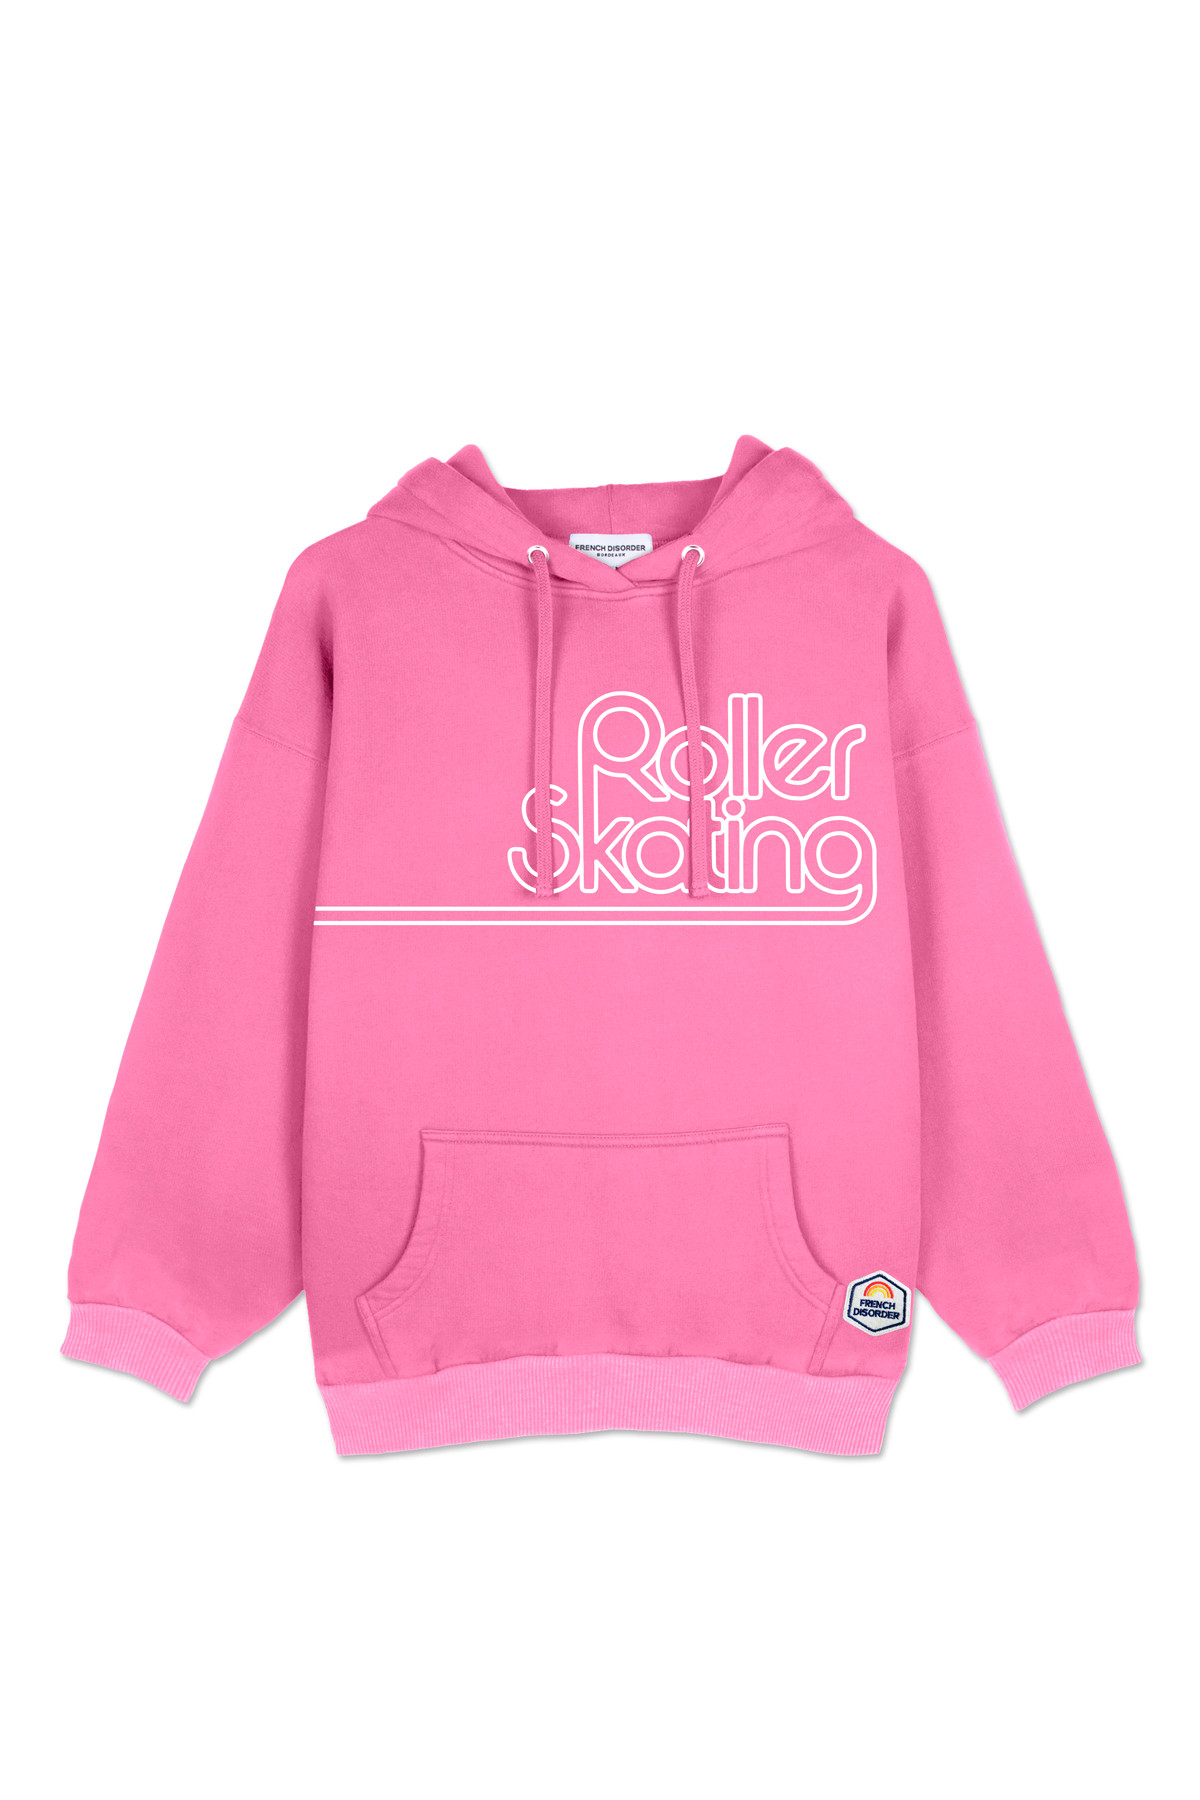 Photo de SWEATS À CAPUCHE Hoodie Washed ROLLER SKATING chez French Disorder